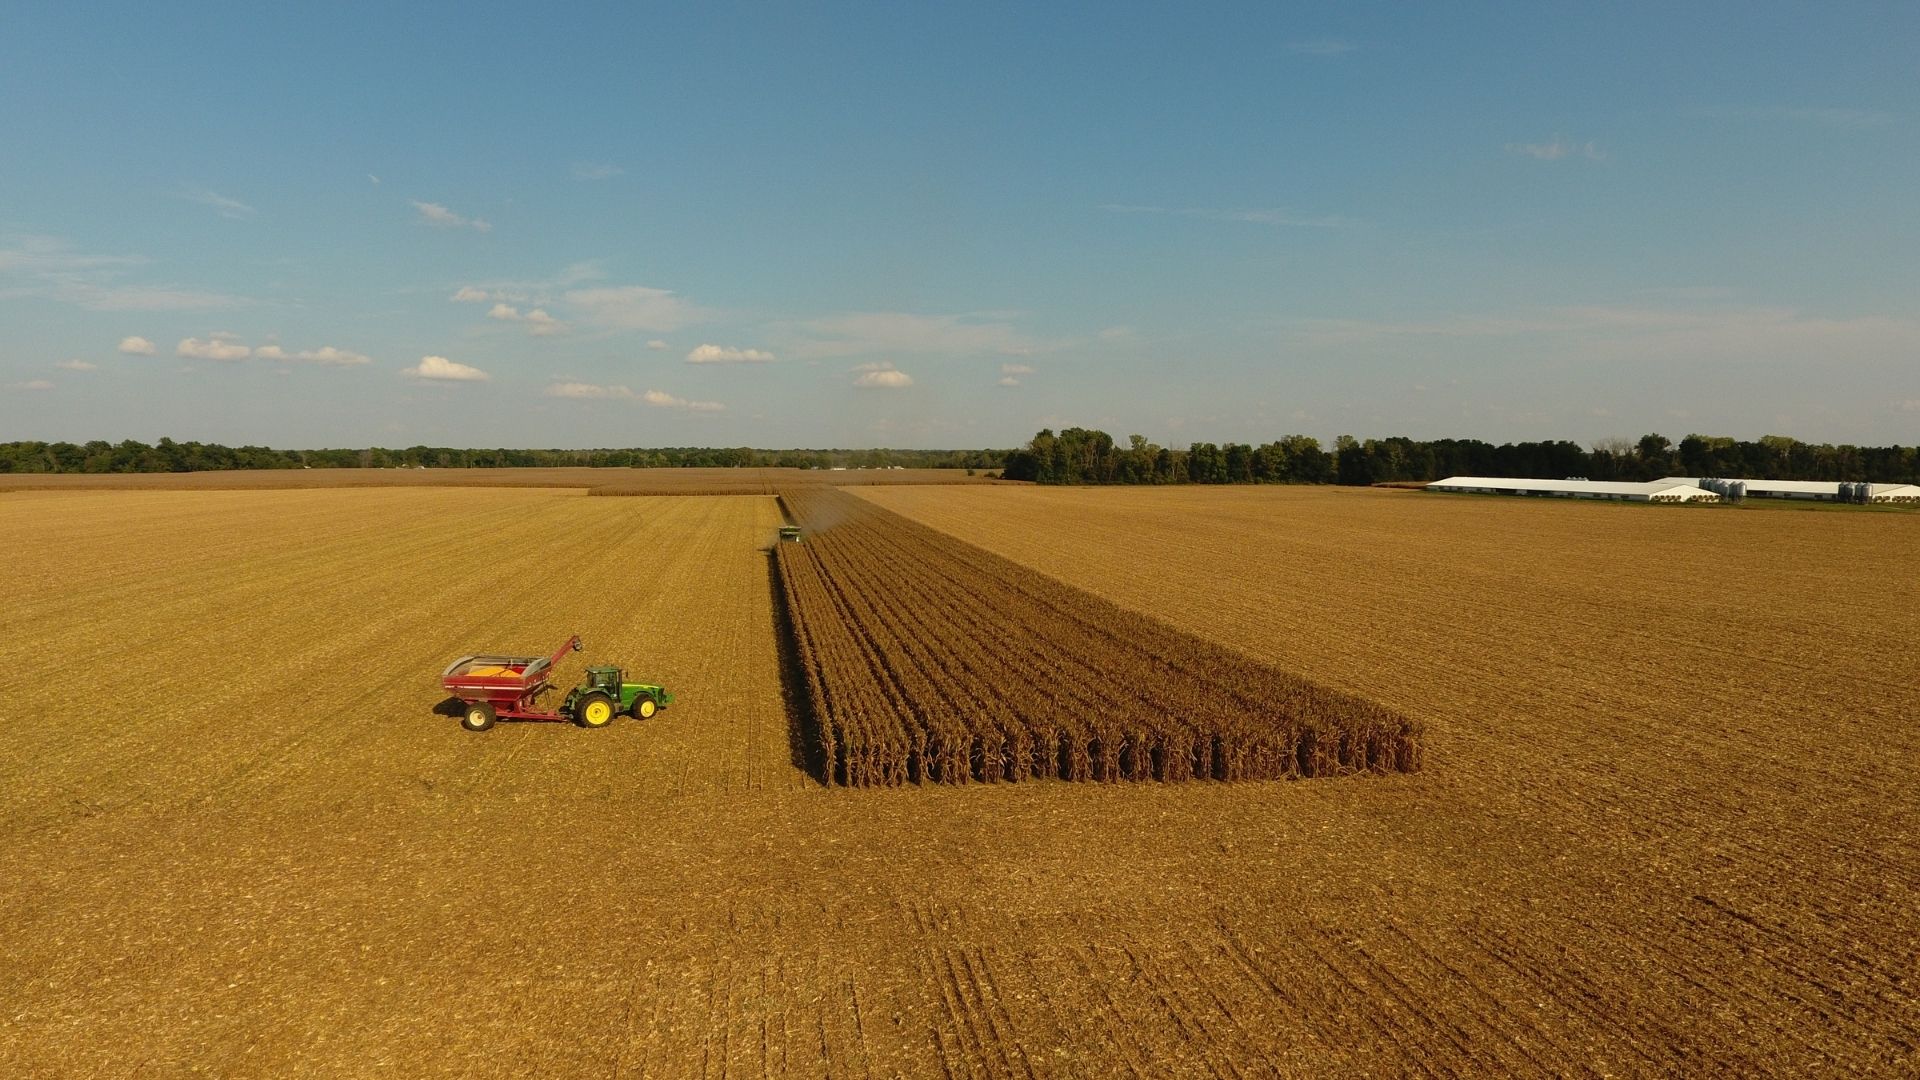 Image of crops being harvested.